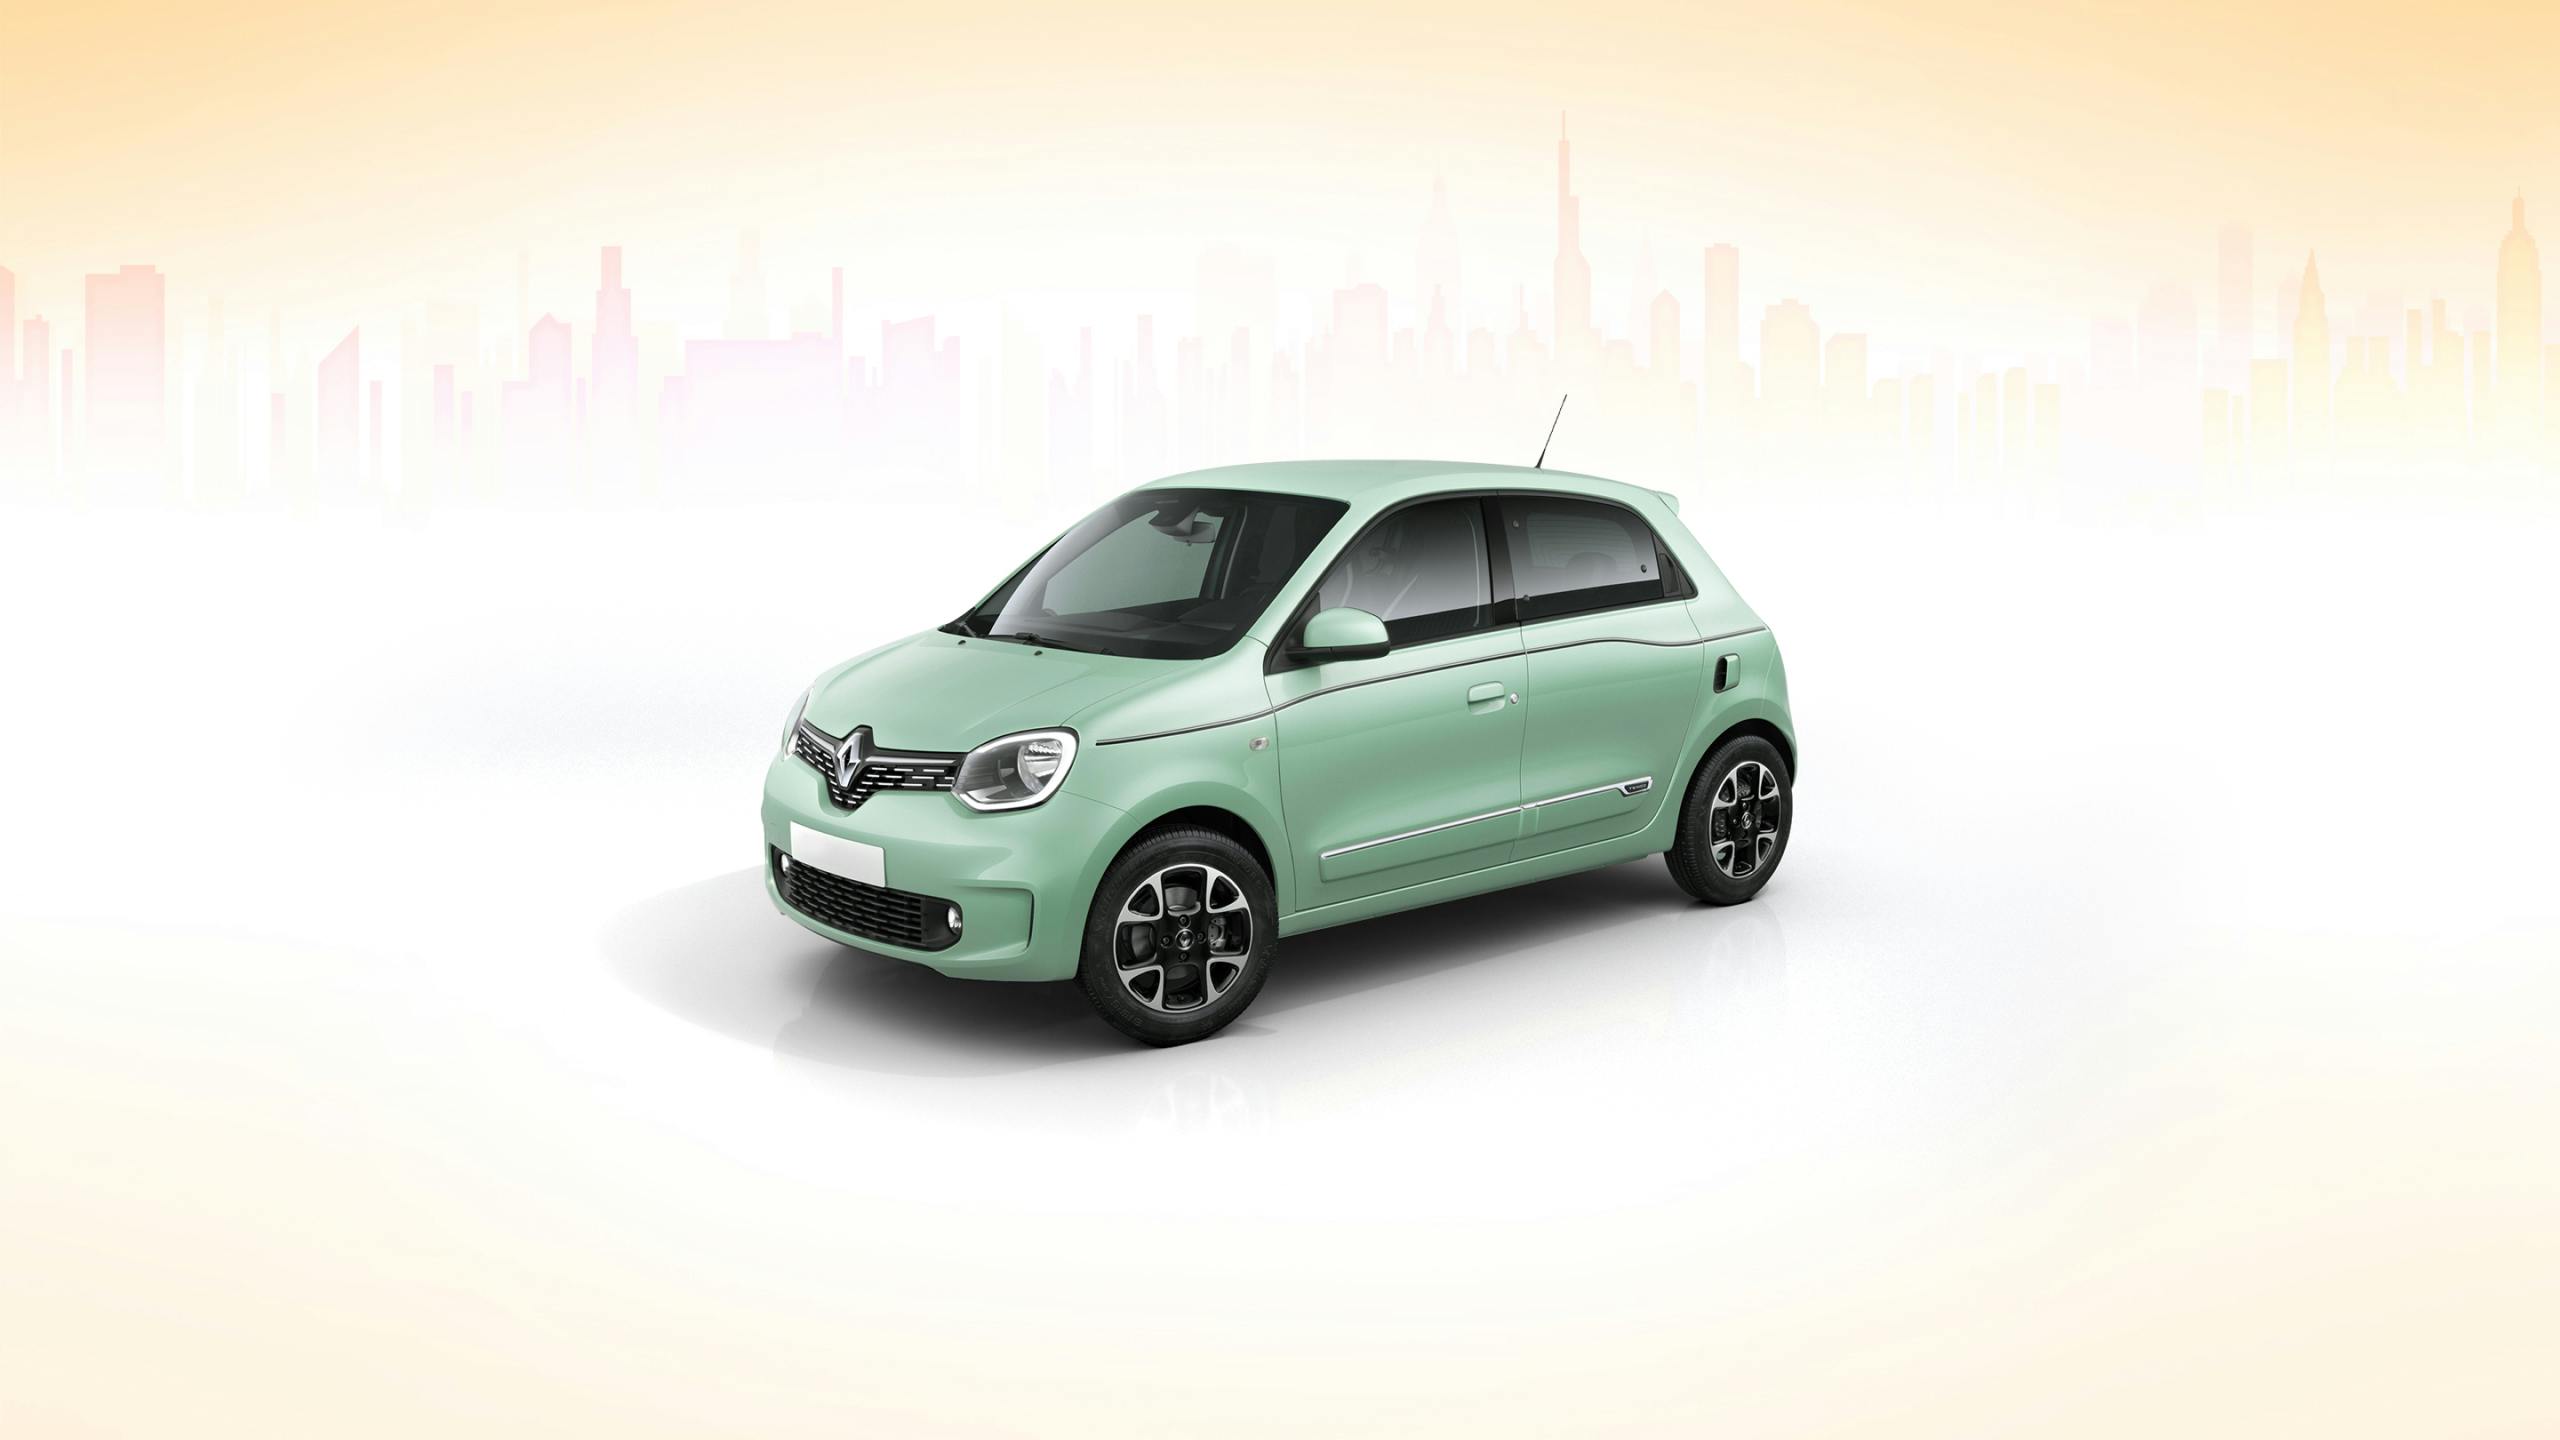 Is displayed a green Renault Twingo